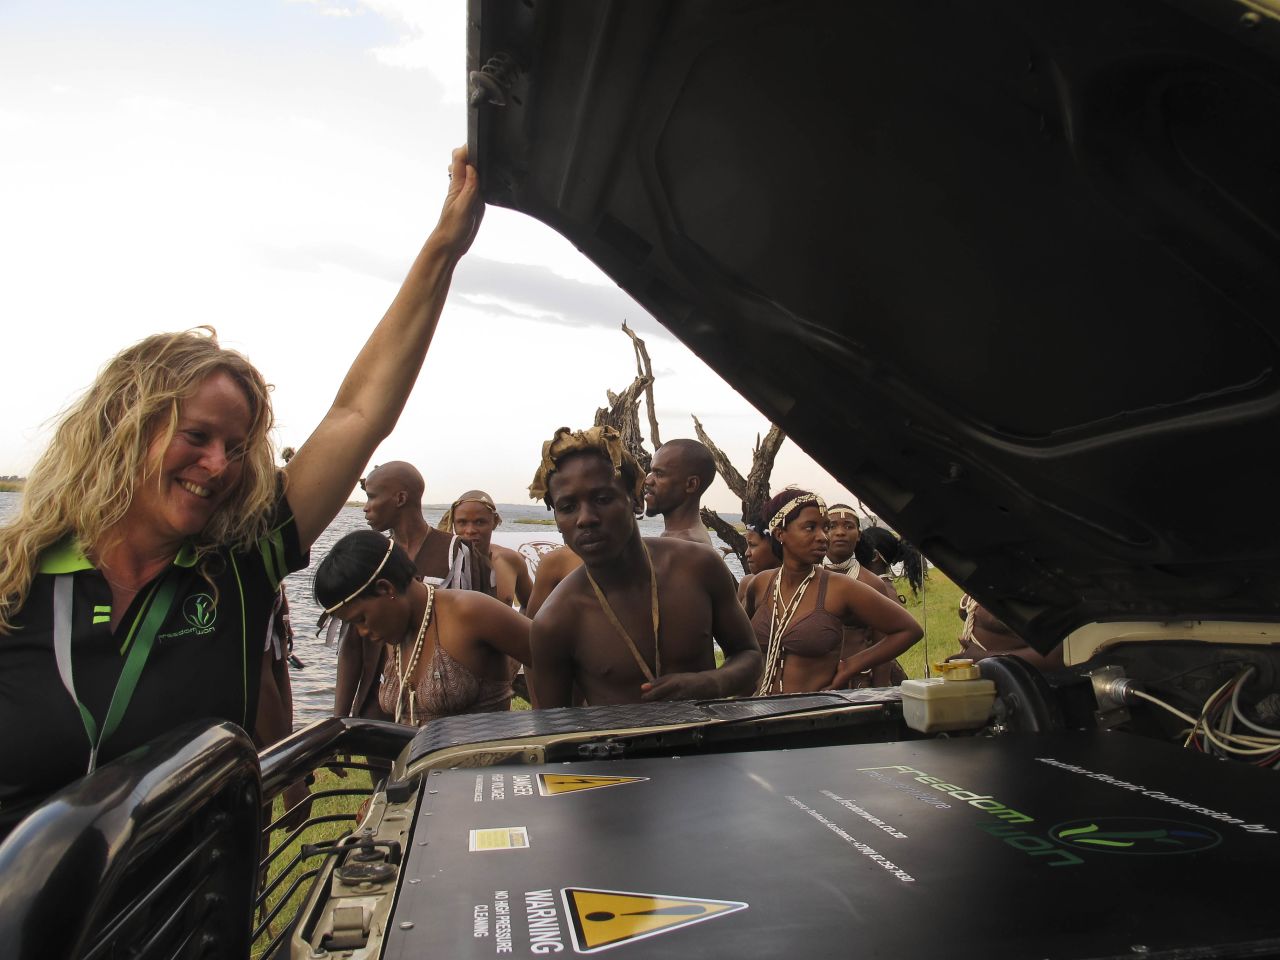 Lizette Kriel, co-owner of electric vehicle company Freedom Won, peeks under the hood of a Land Rover converted from diesel to electric power.